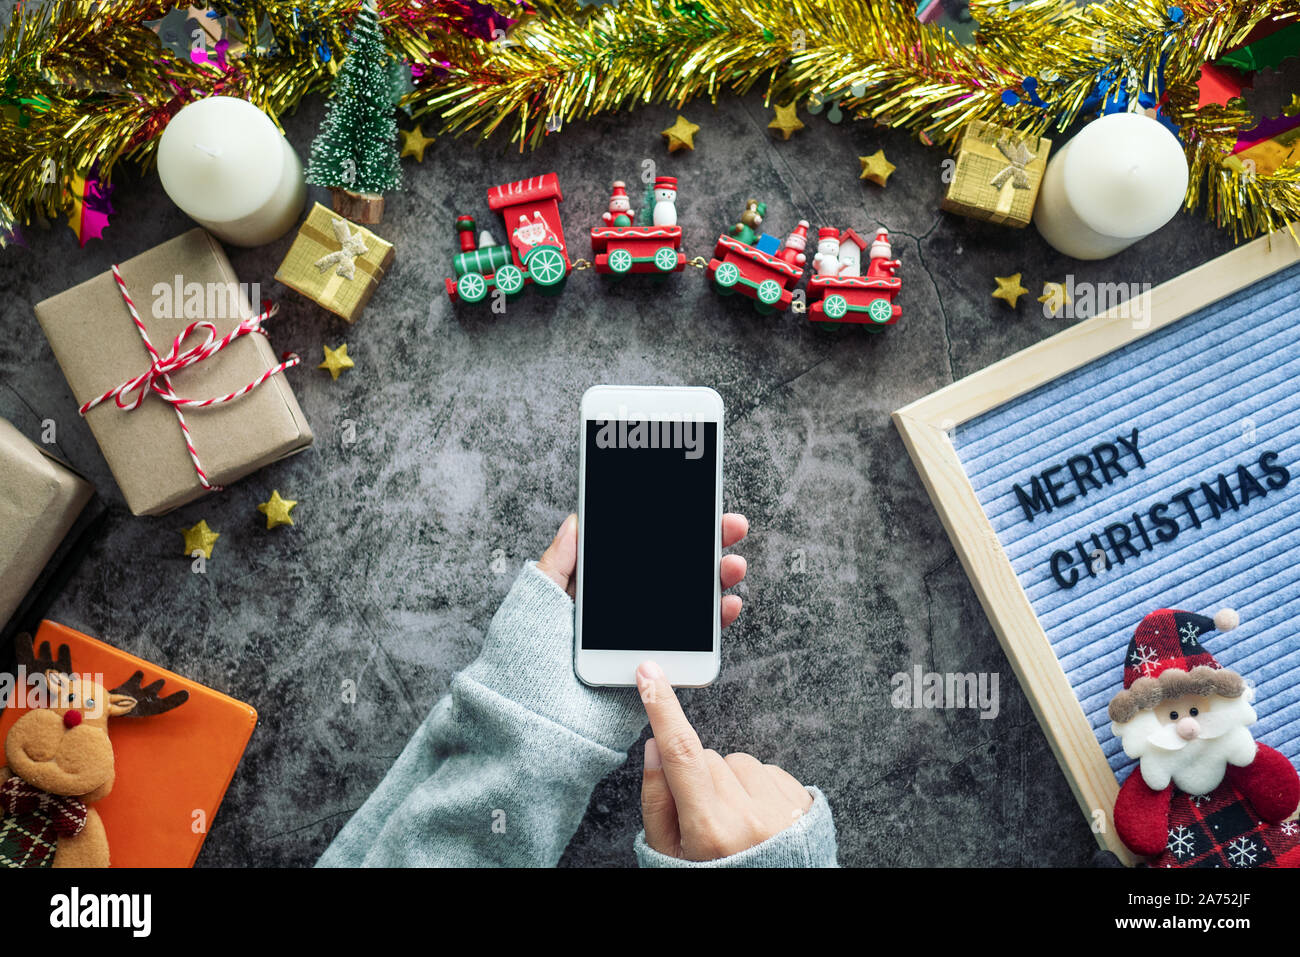 online shopping for Christmas season and gift festival. hand holding mobile phone with blank screen and press button for shopping online, decorations Stock Photo